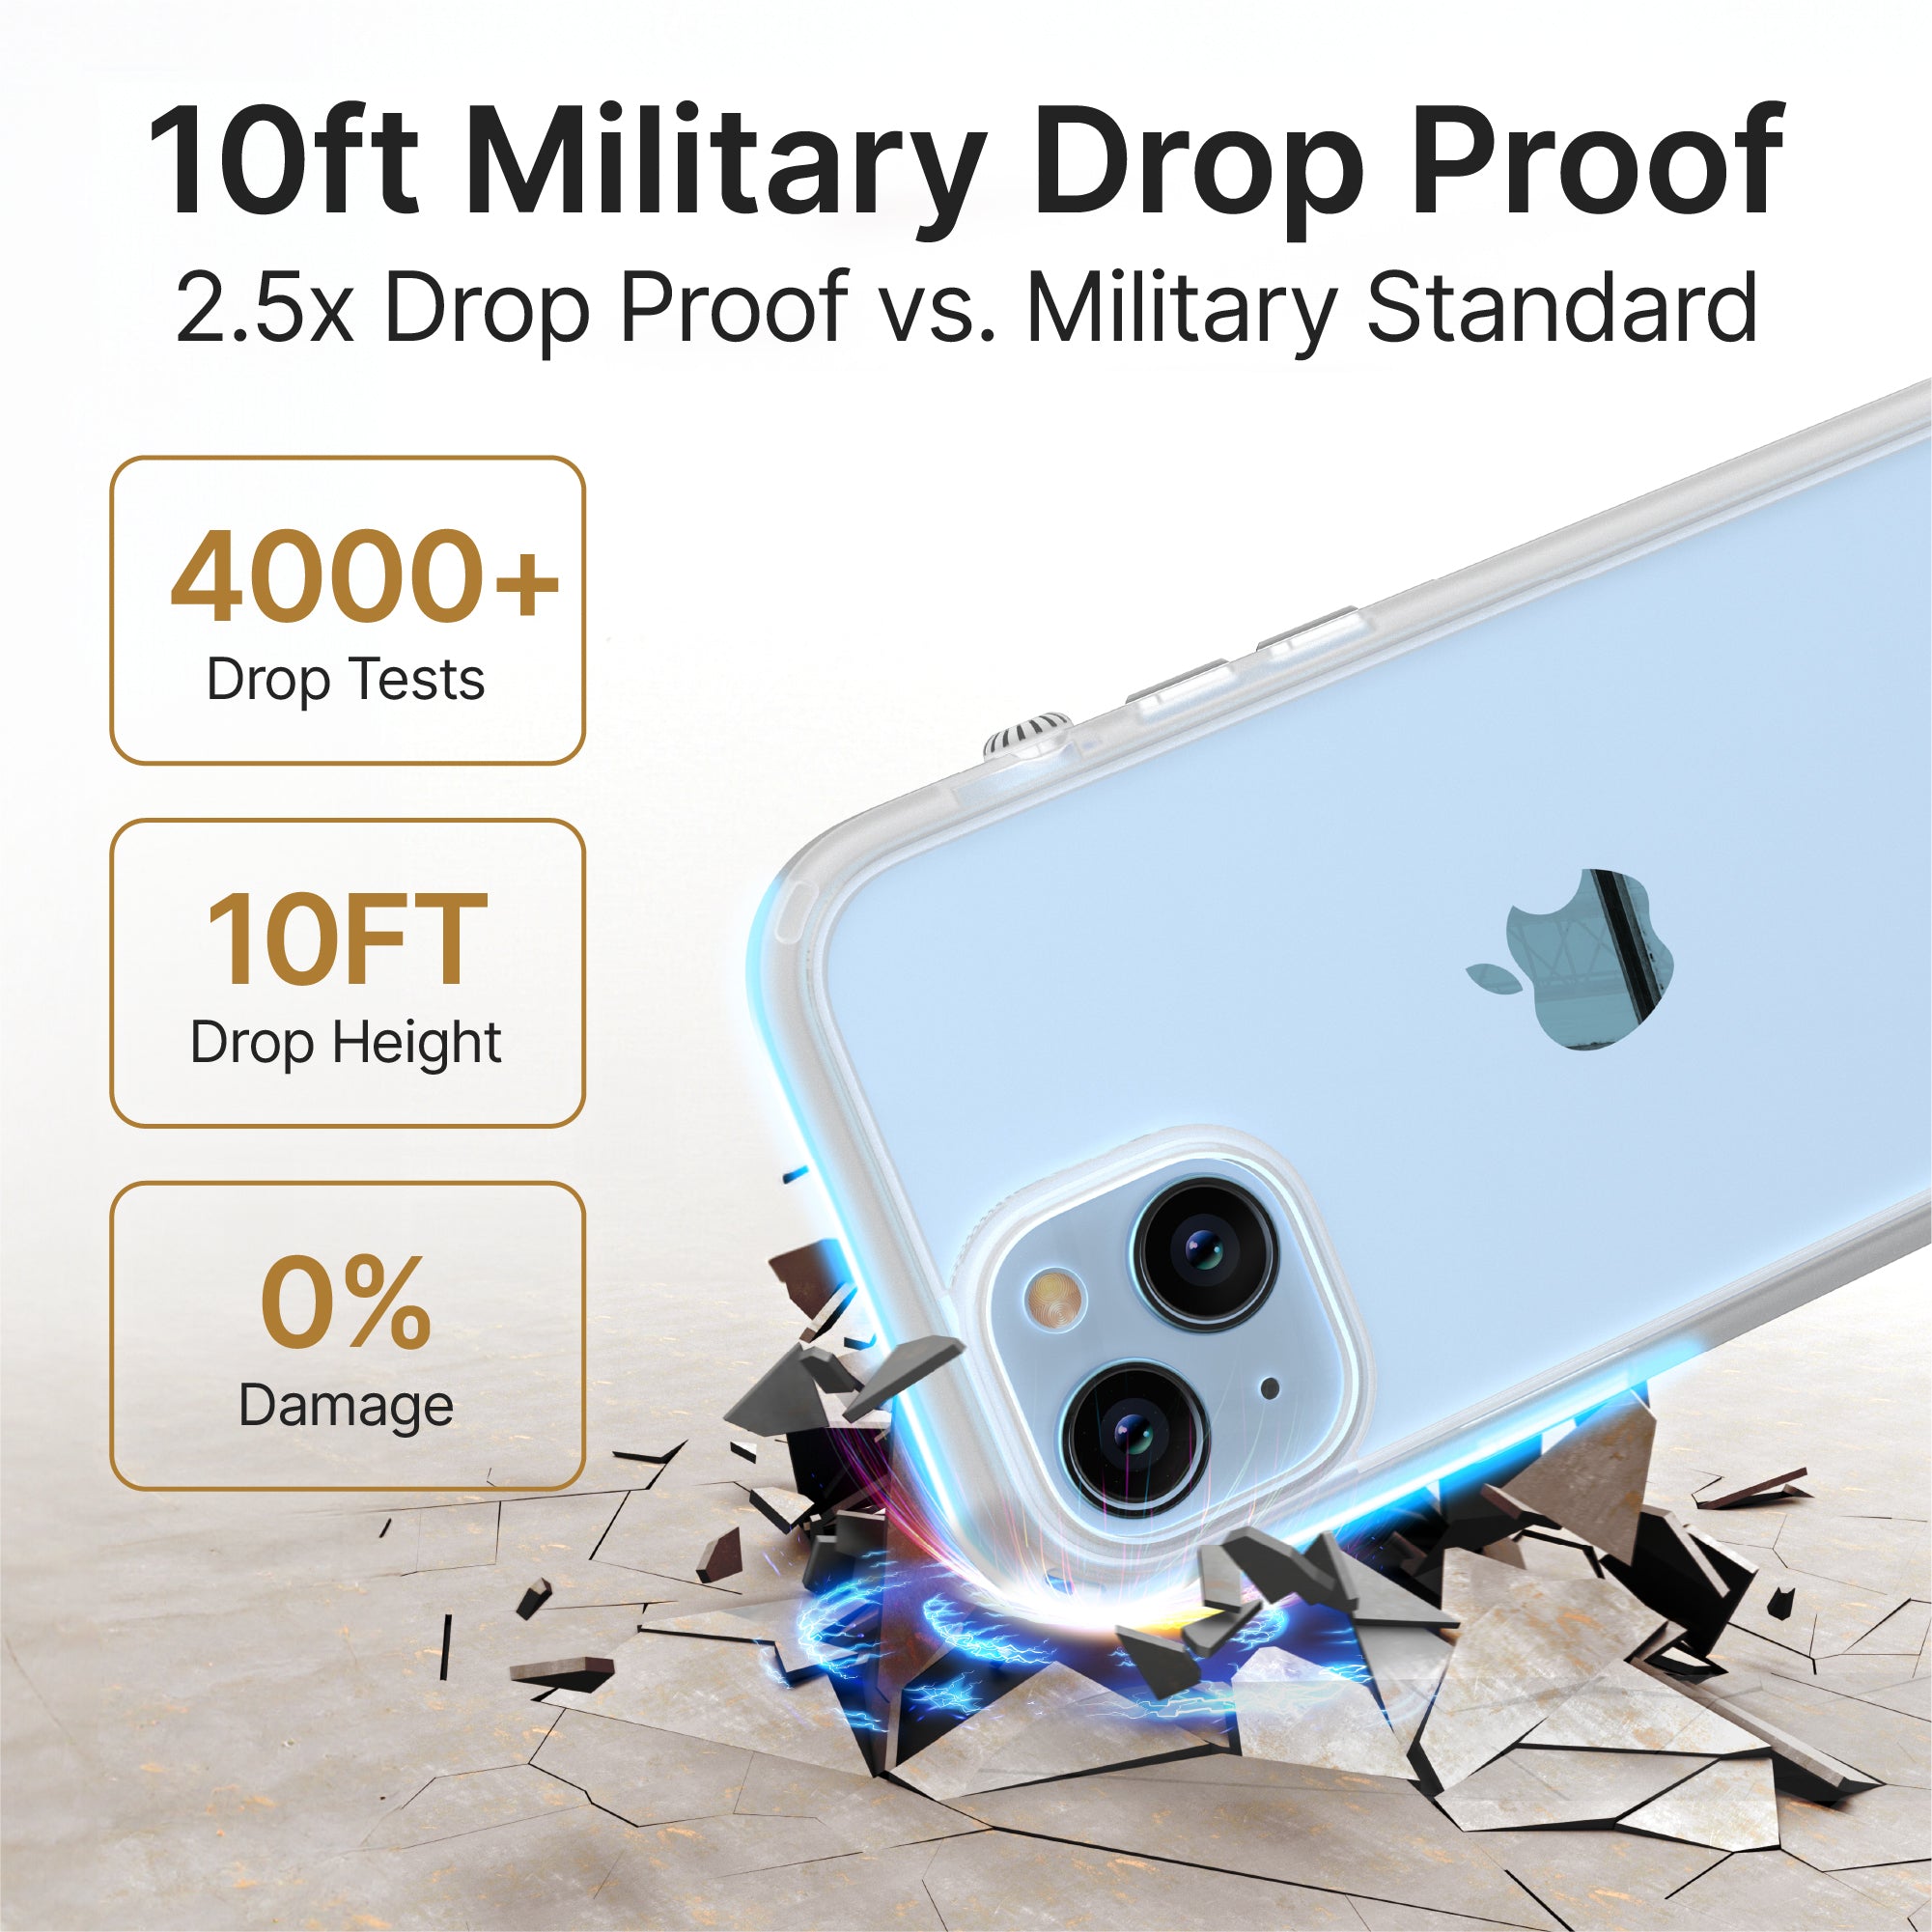 Catalyst iphone 15 series influence case iphone 15 pro in clear colorway showing the durability of the case text reads 10ft military drop proof 2.5 x drop proof vs. military standard 4000+ drop tests 10ft drop height 0% damage